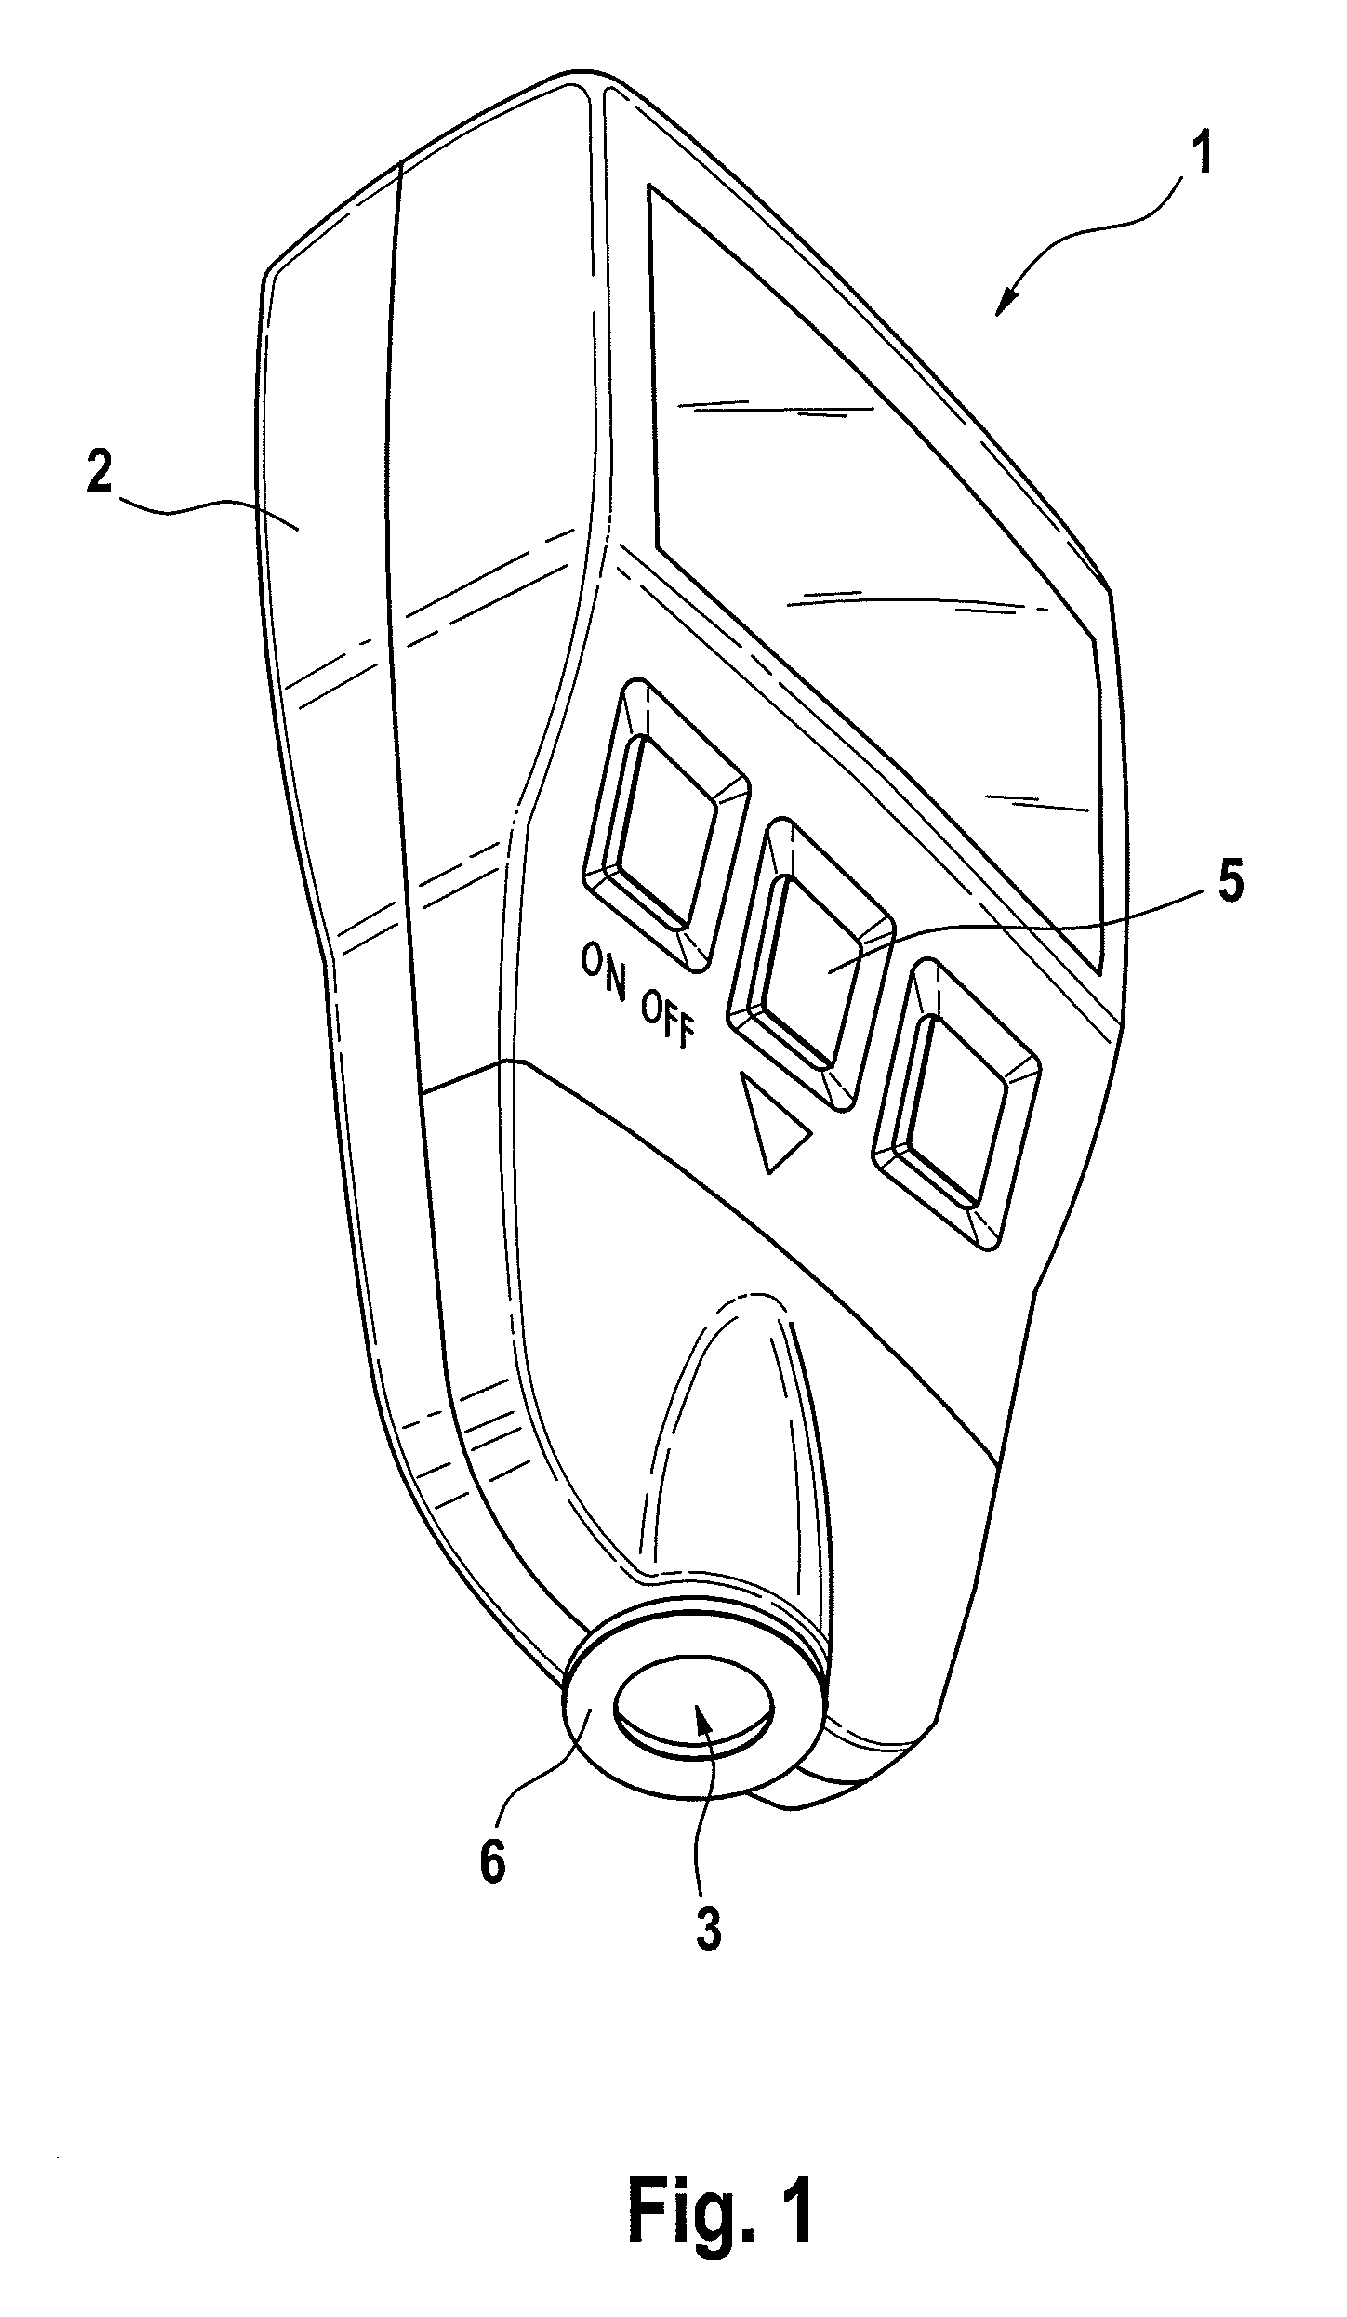 Handheld apparatus for creating a puncture wound